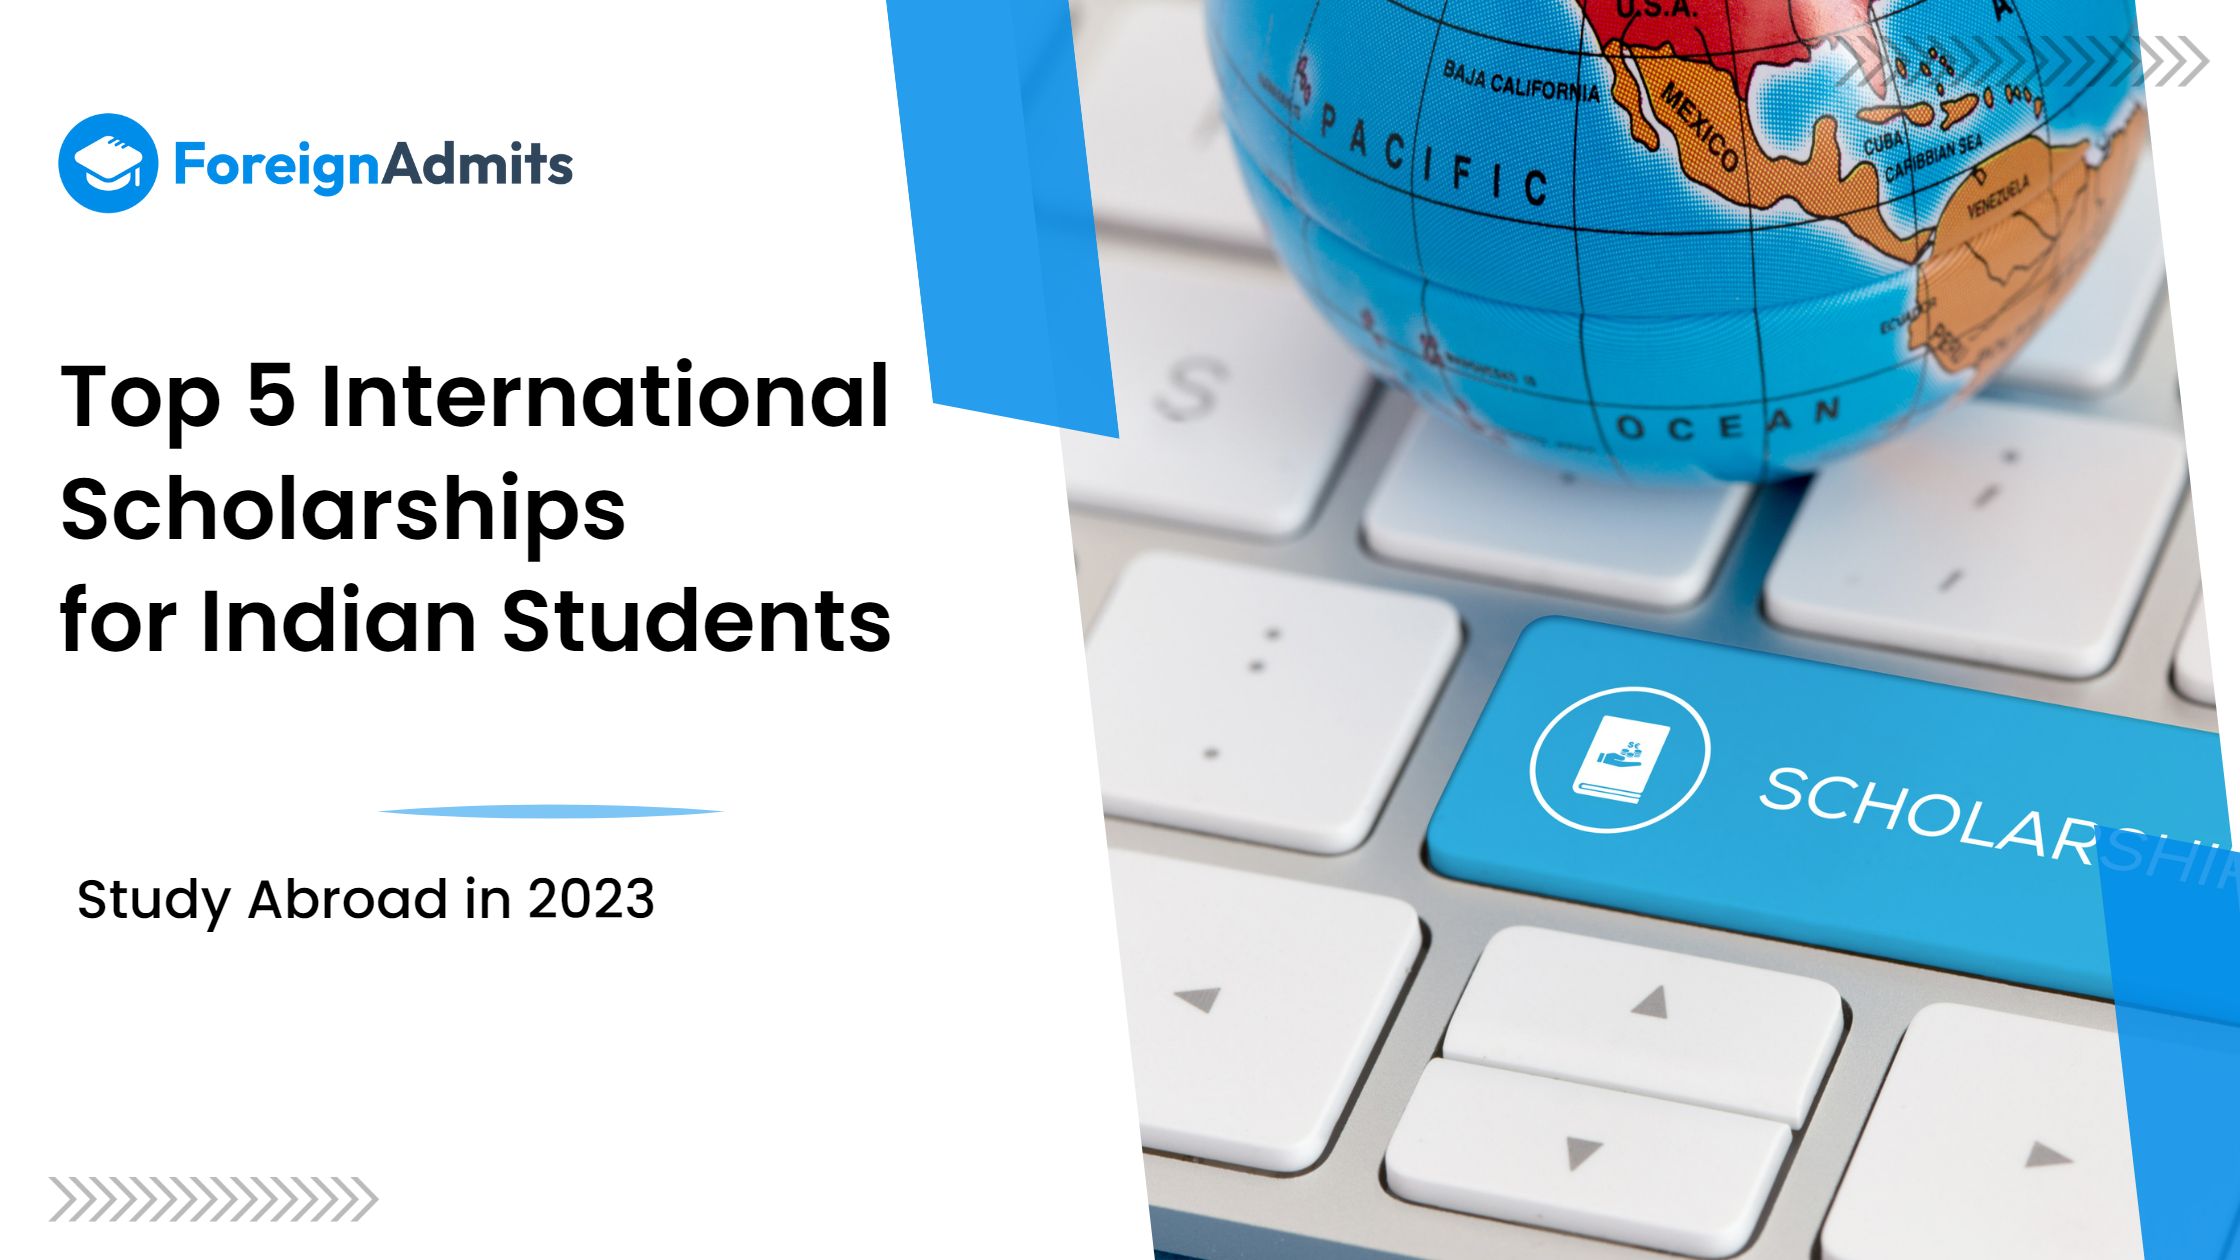 Top 5 International Scholarships for Indian Students to Study Abroad in 2023 (Exclusive)